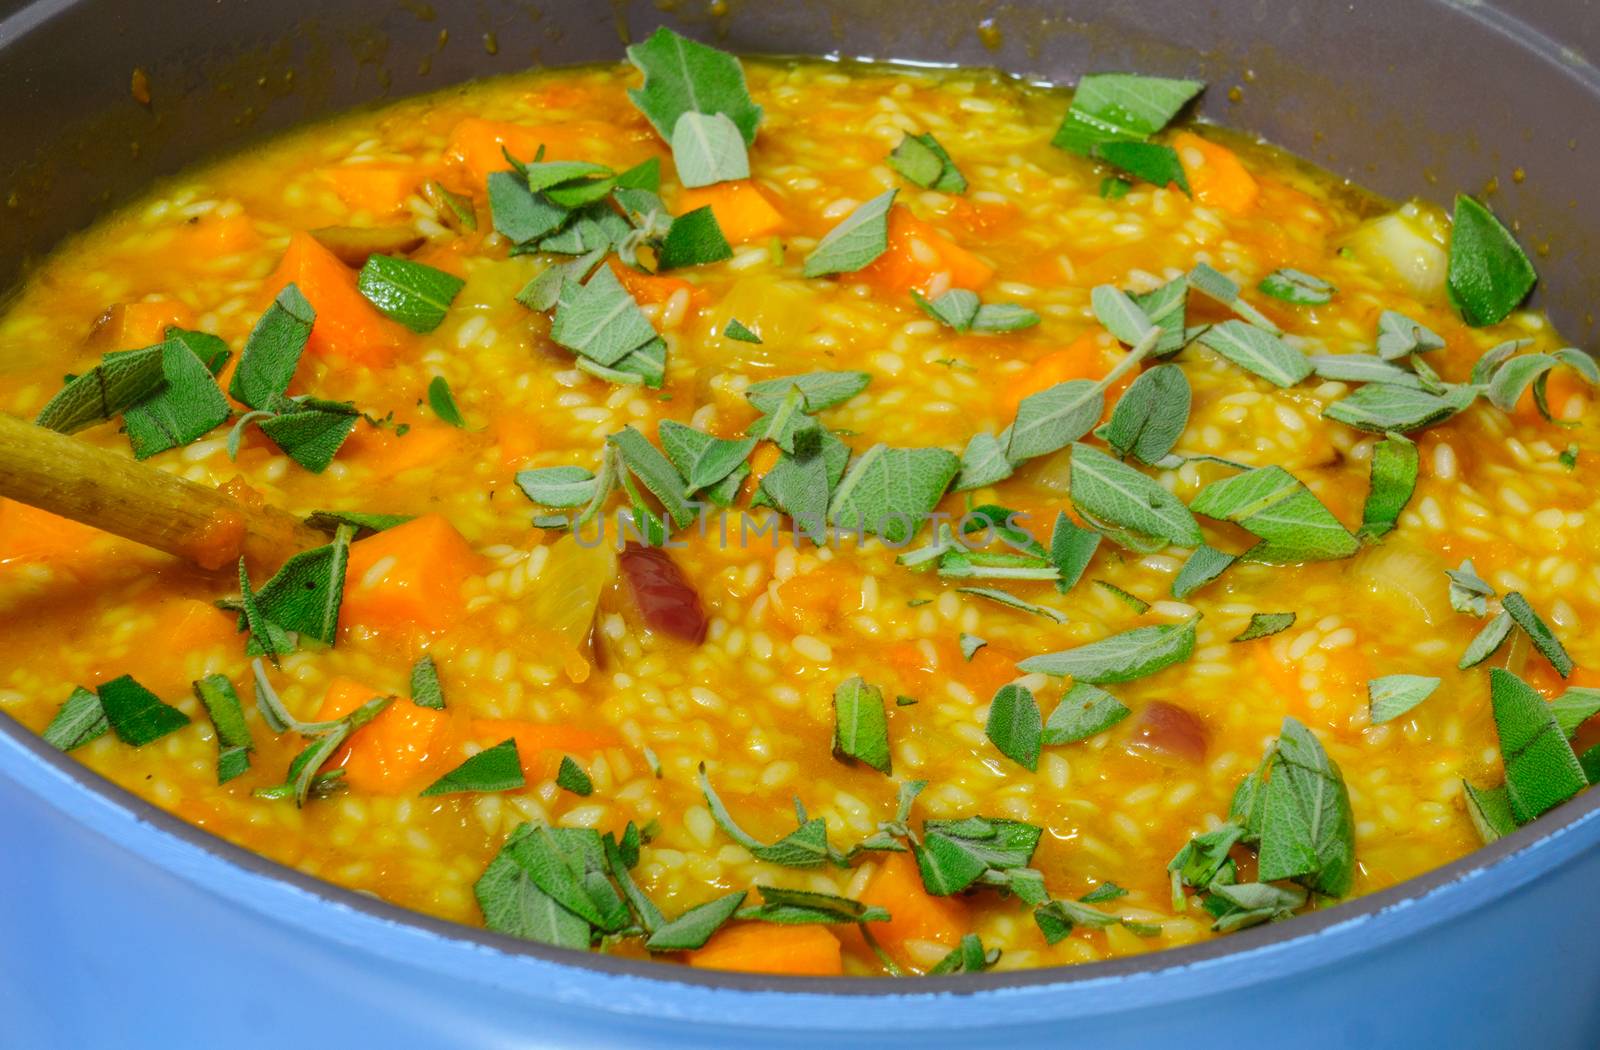 Risotto, an Italian rice dish, made with pumpkin and sage